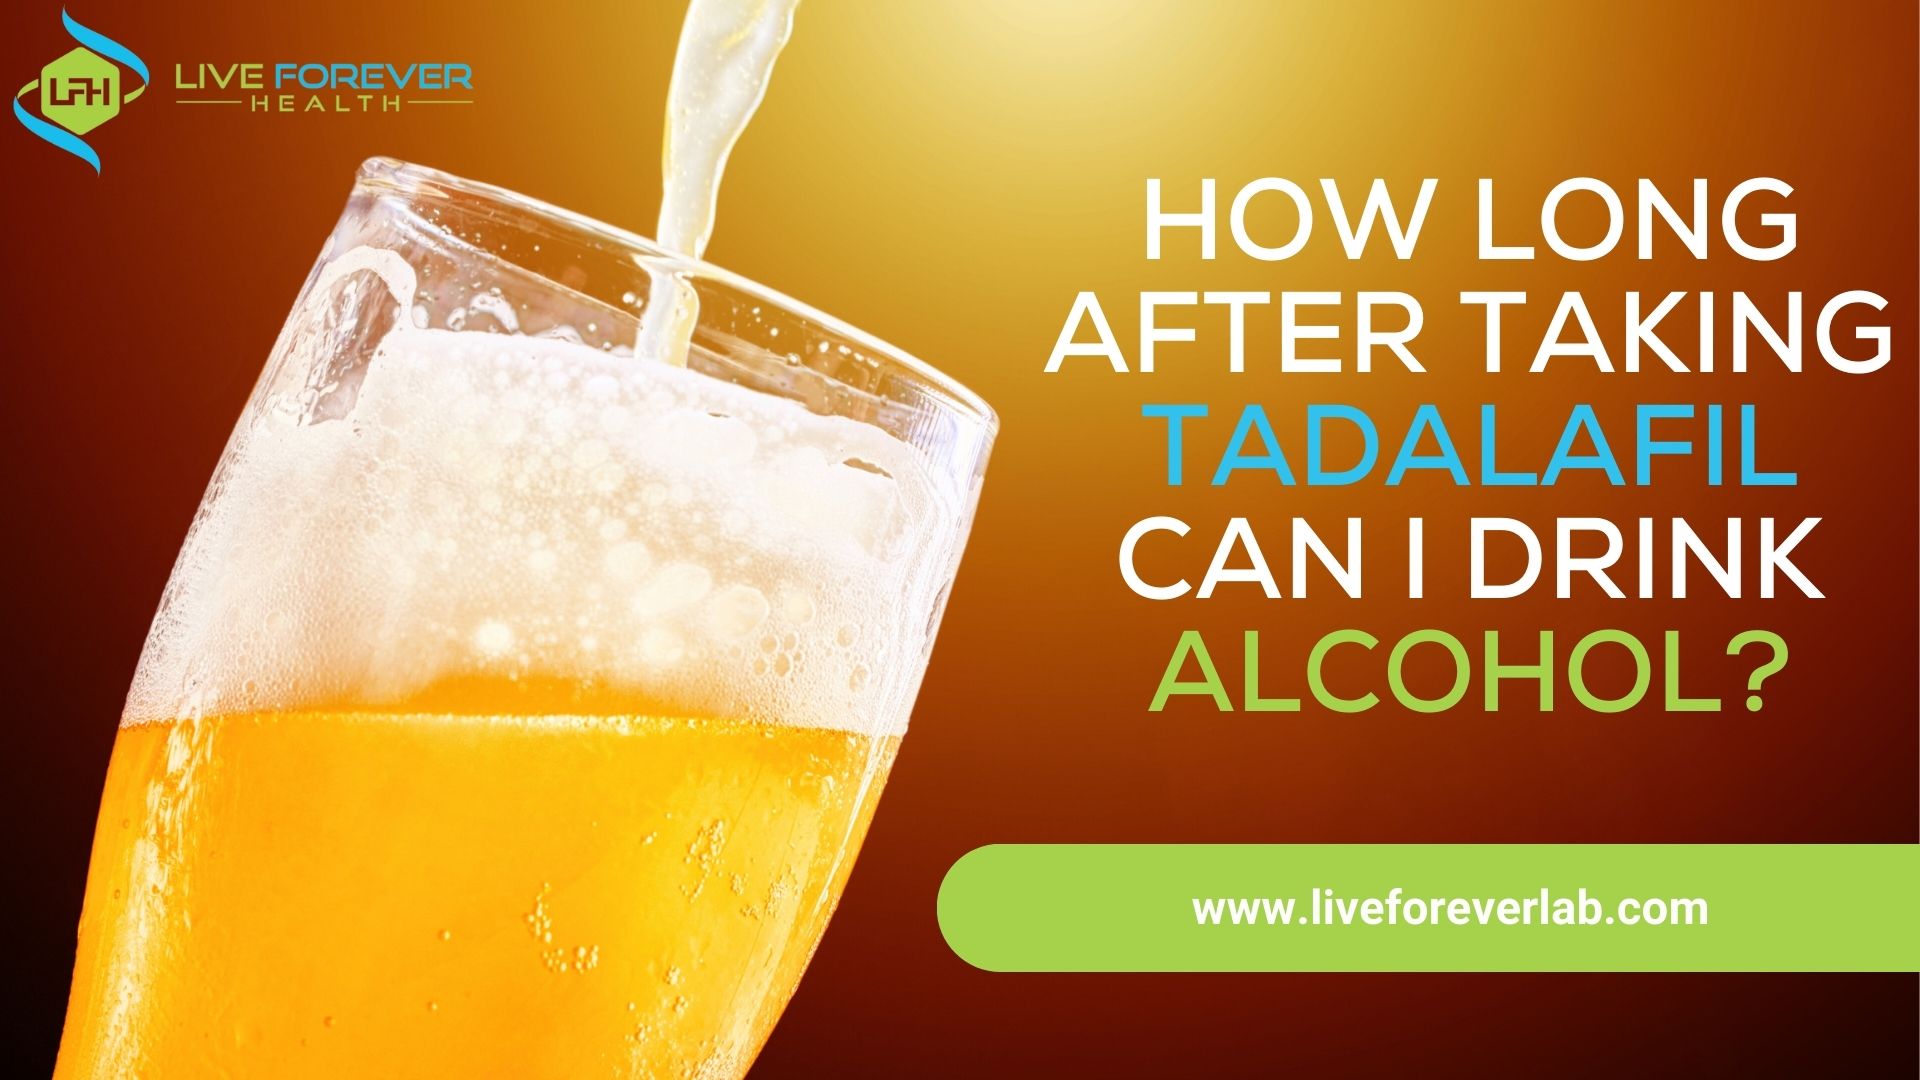 How Long After Taking Tadalafil Can I Drink Alcohol